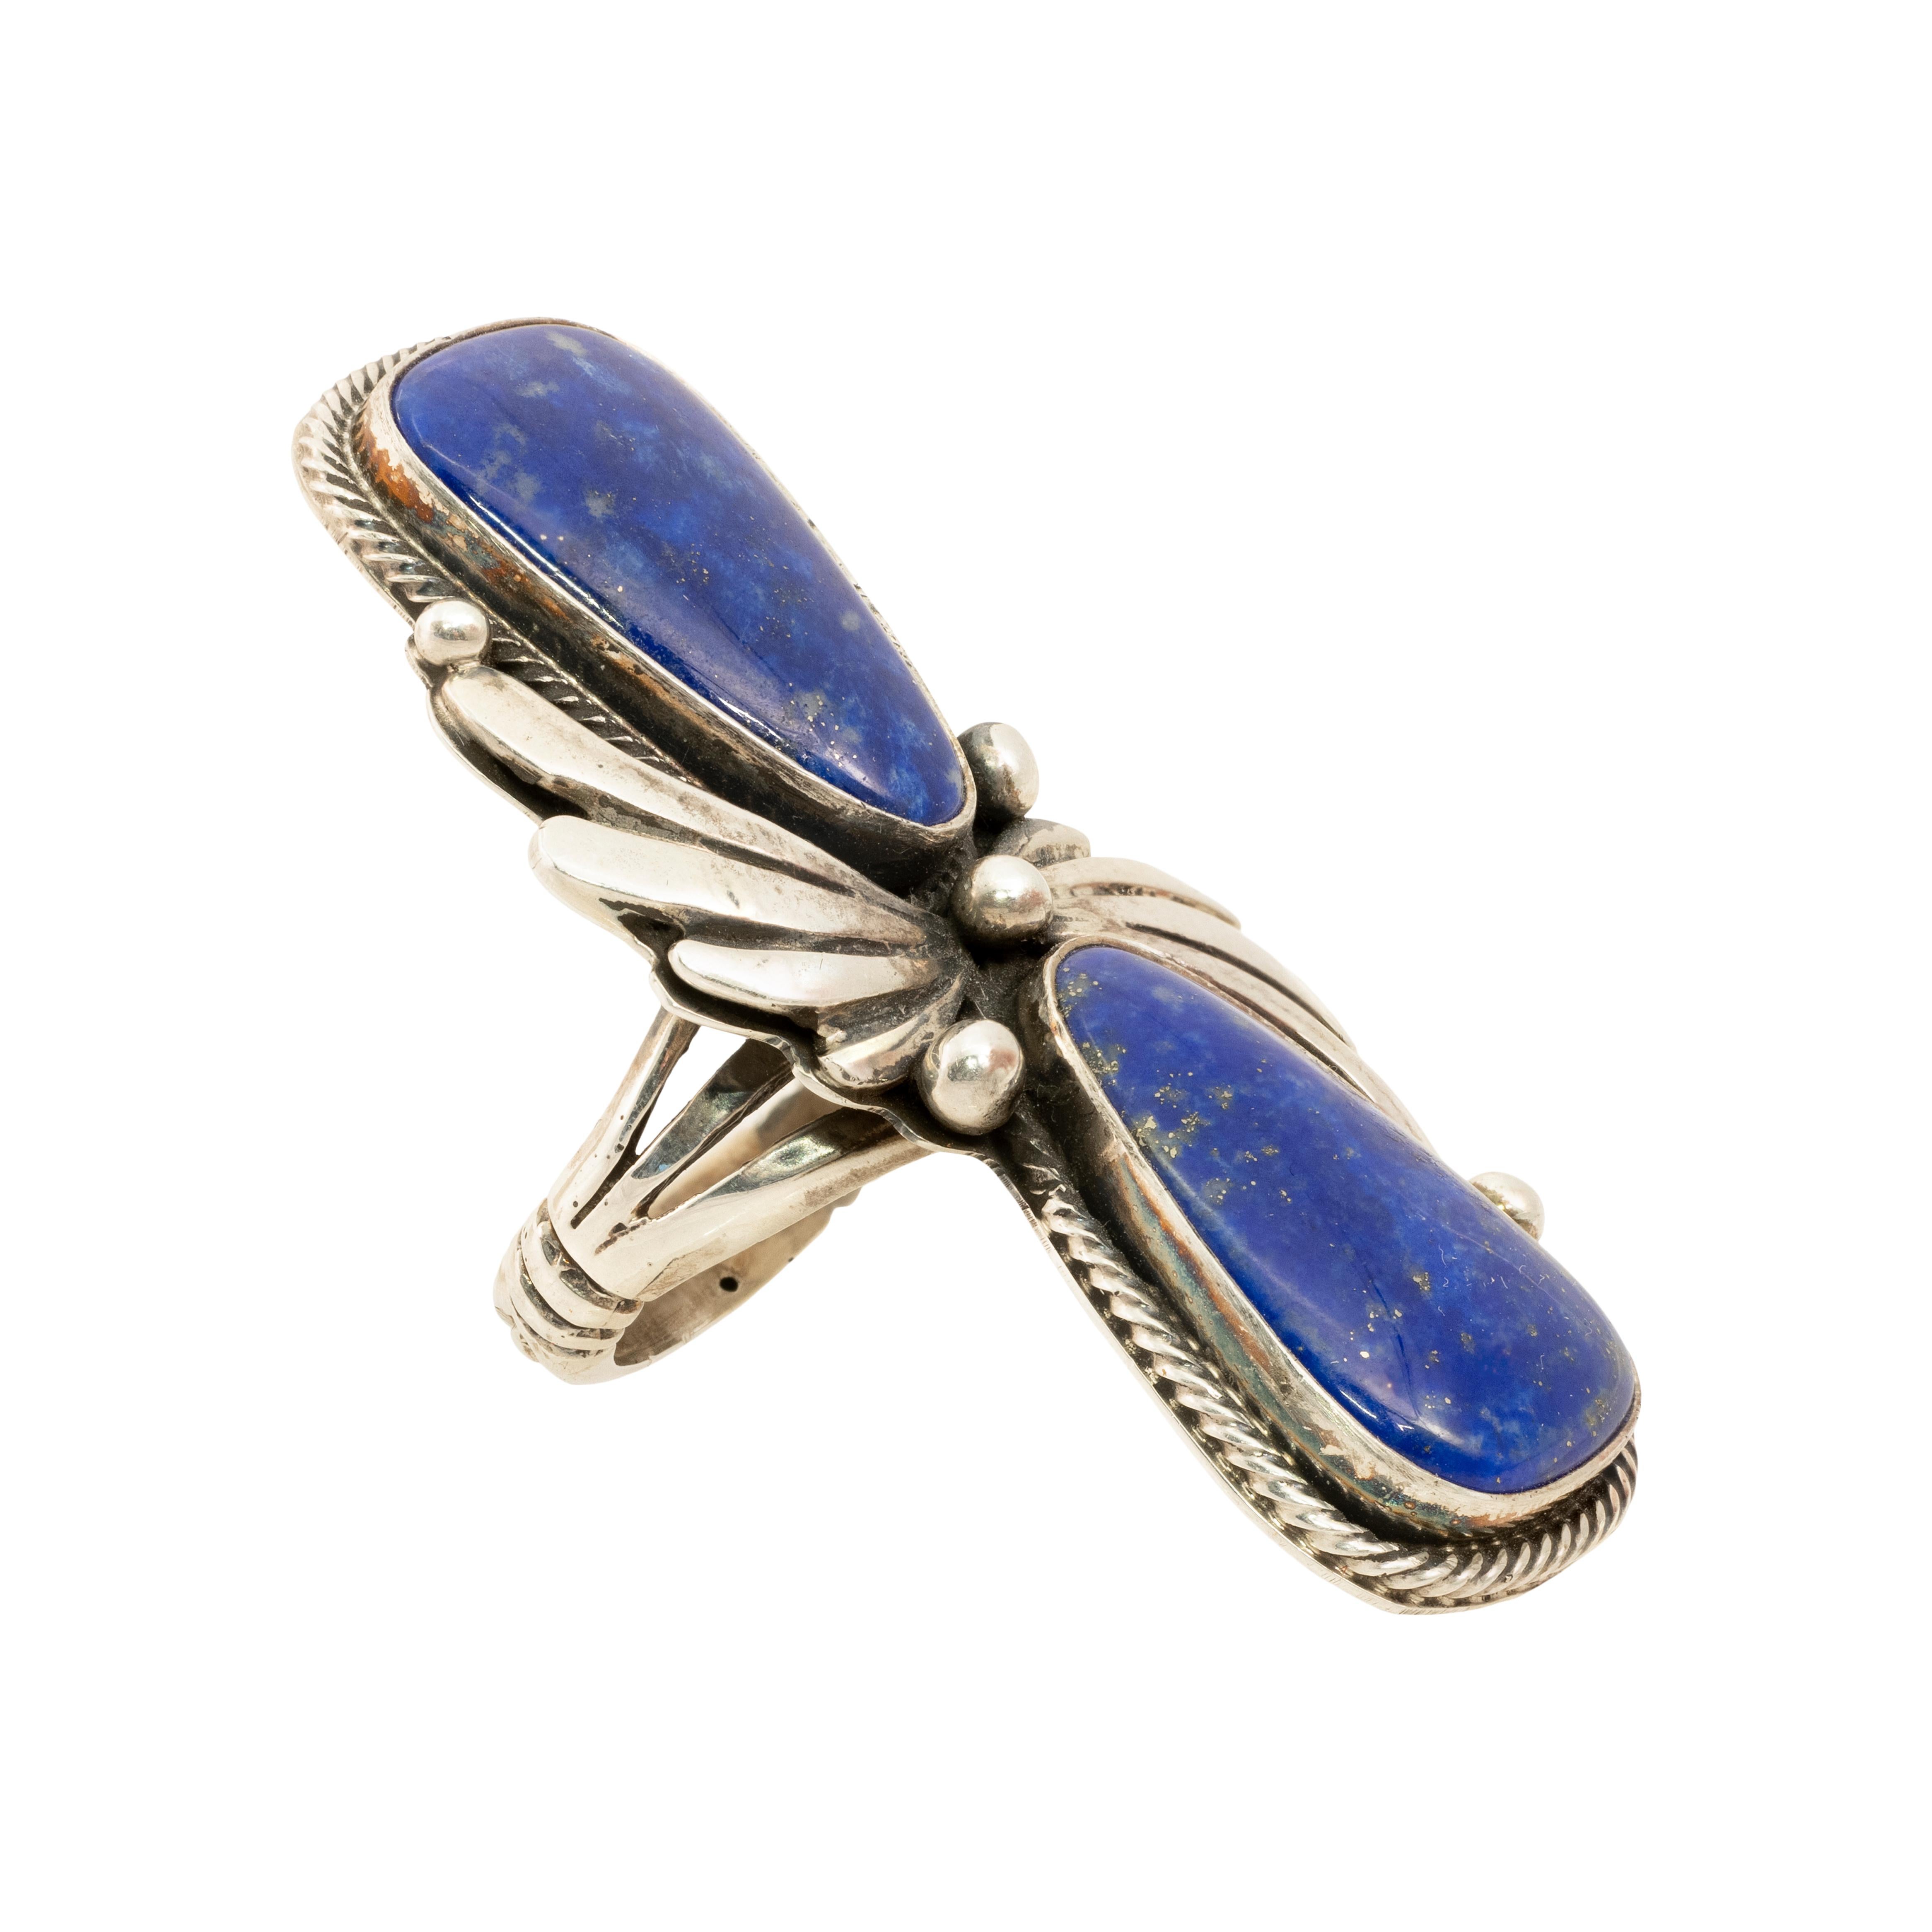 B. Richards sterling double stone ring with natural lapis stones at each end and accented with a tiny rope design. The center has raindrop beads and twisted sterling for additional accents. Stamped 